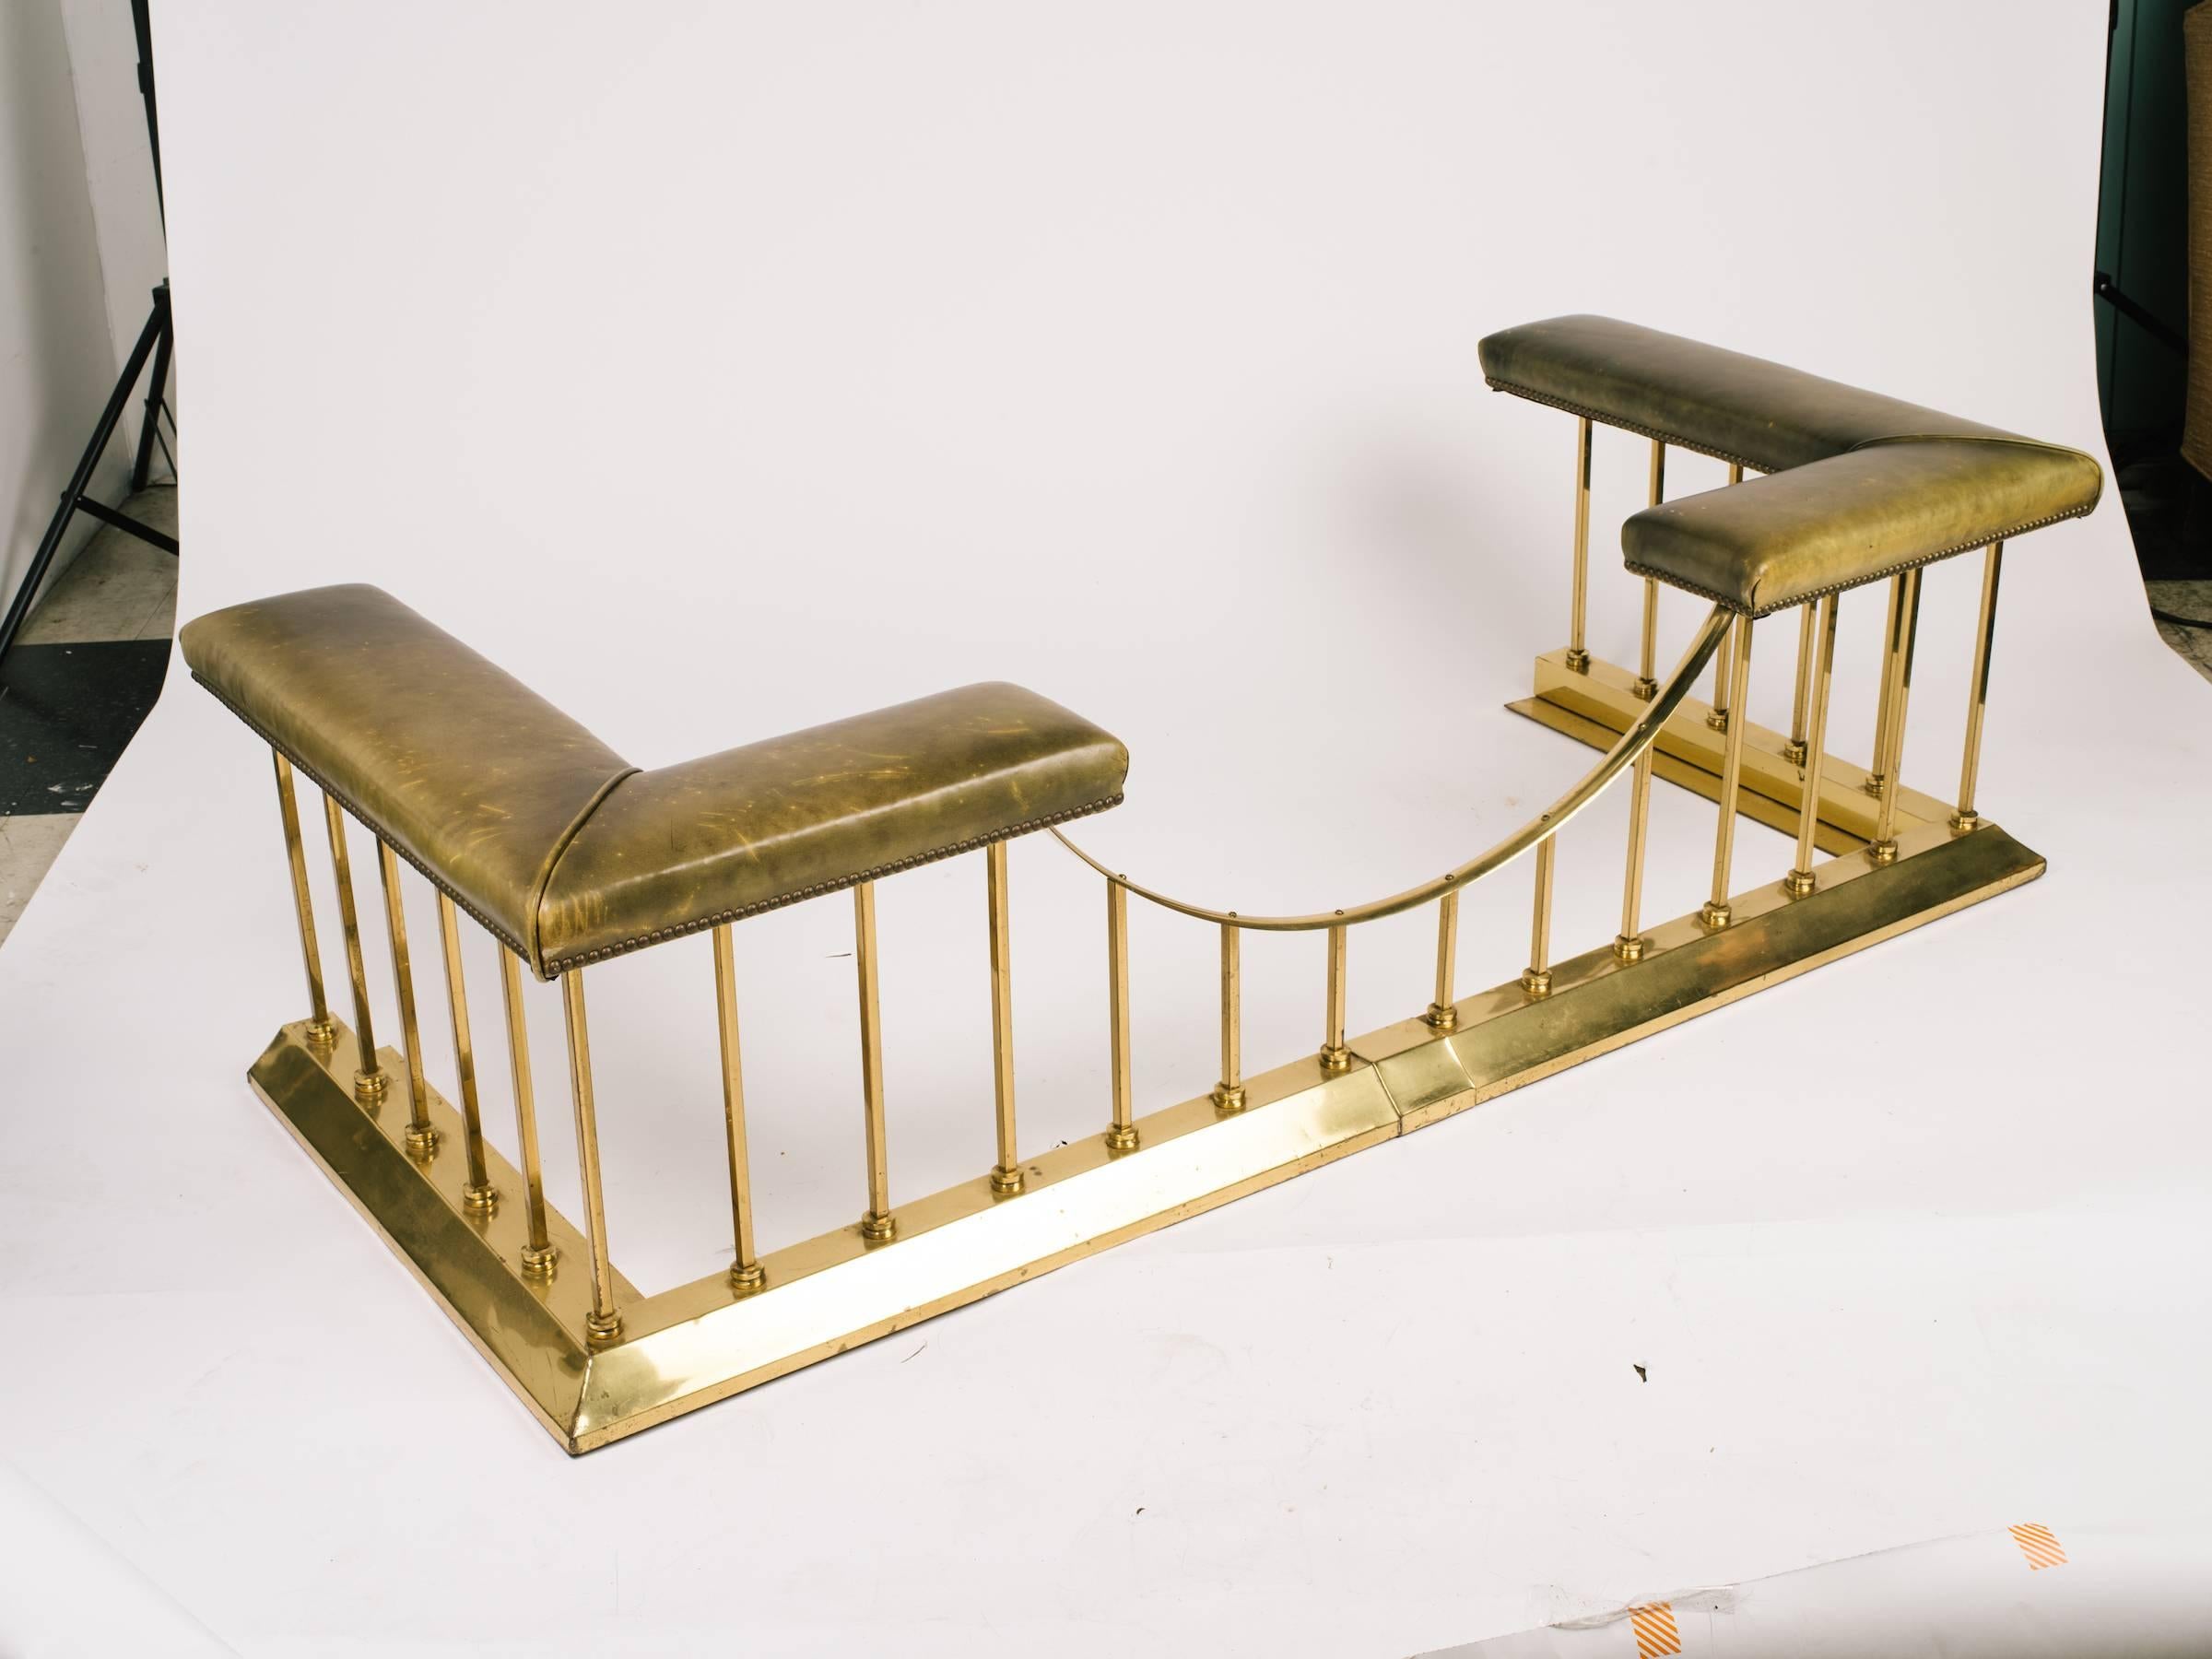 1880s English brass and leather fire place fender bench. 